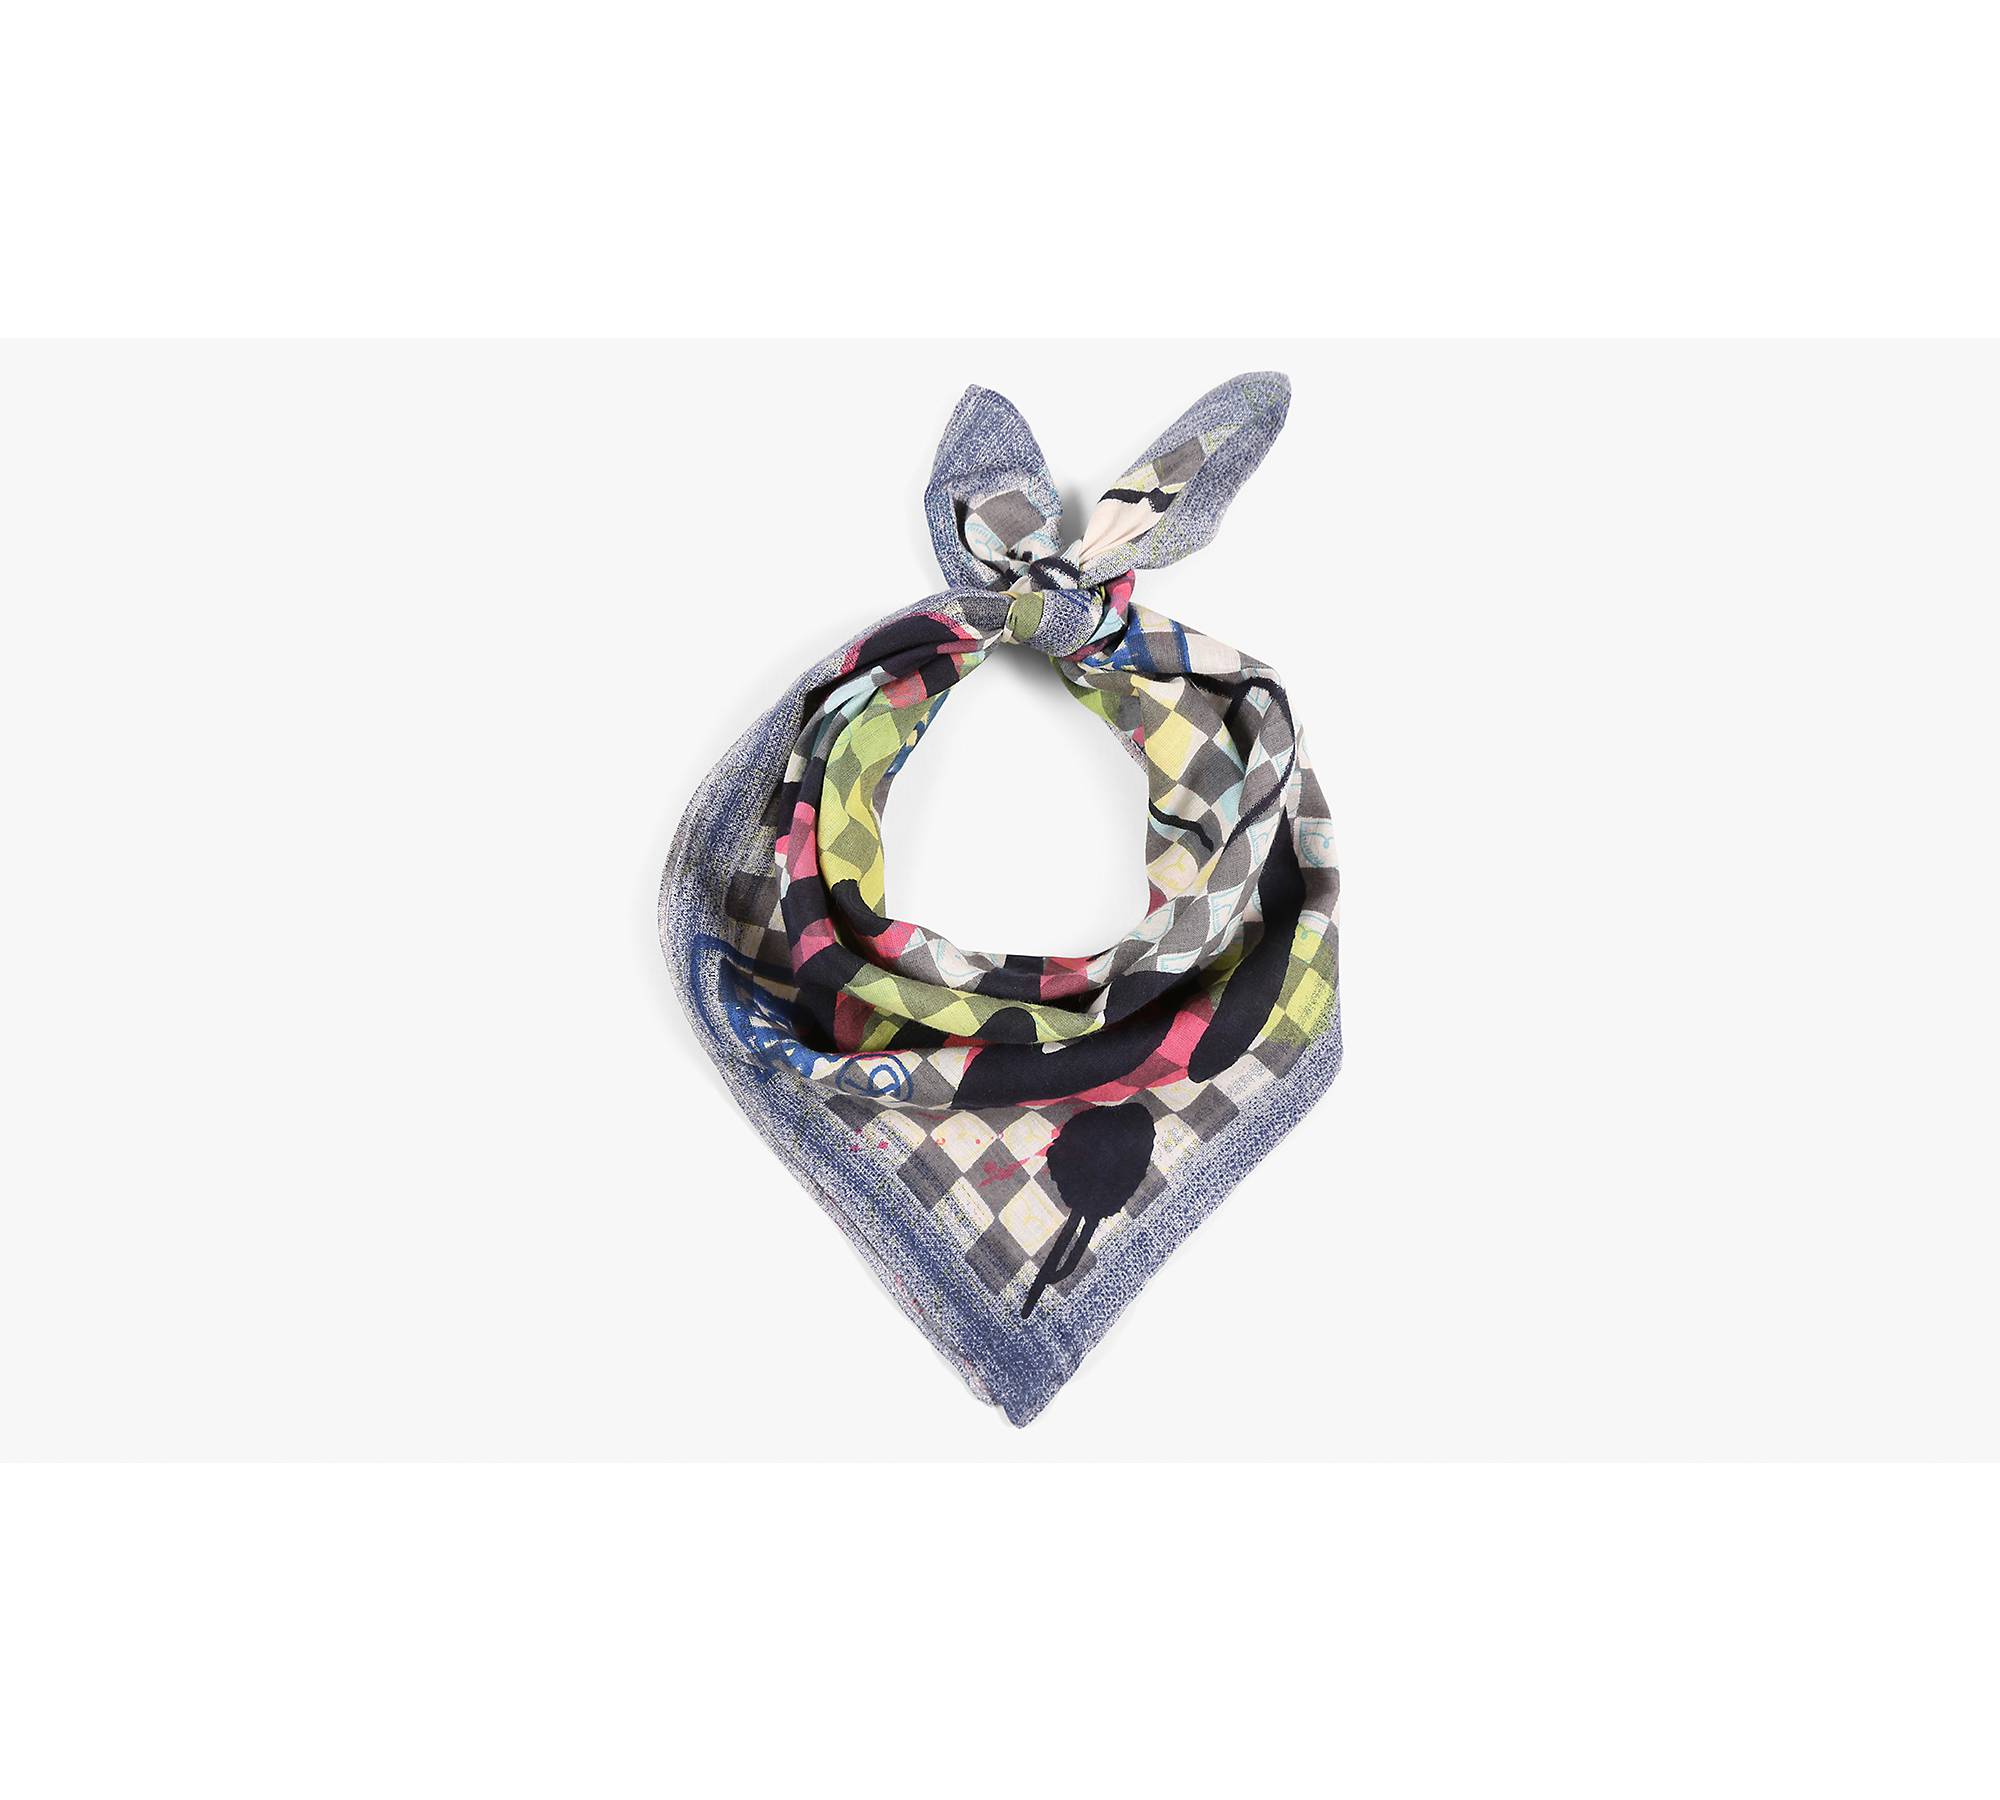 Louis Vuitton scarf /# Inspire to use for head scarf